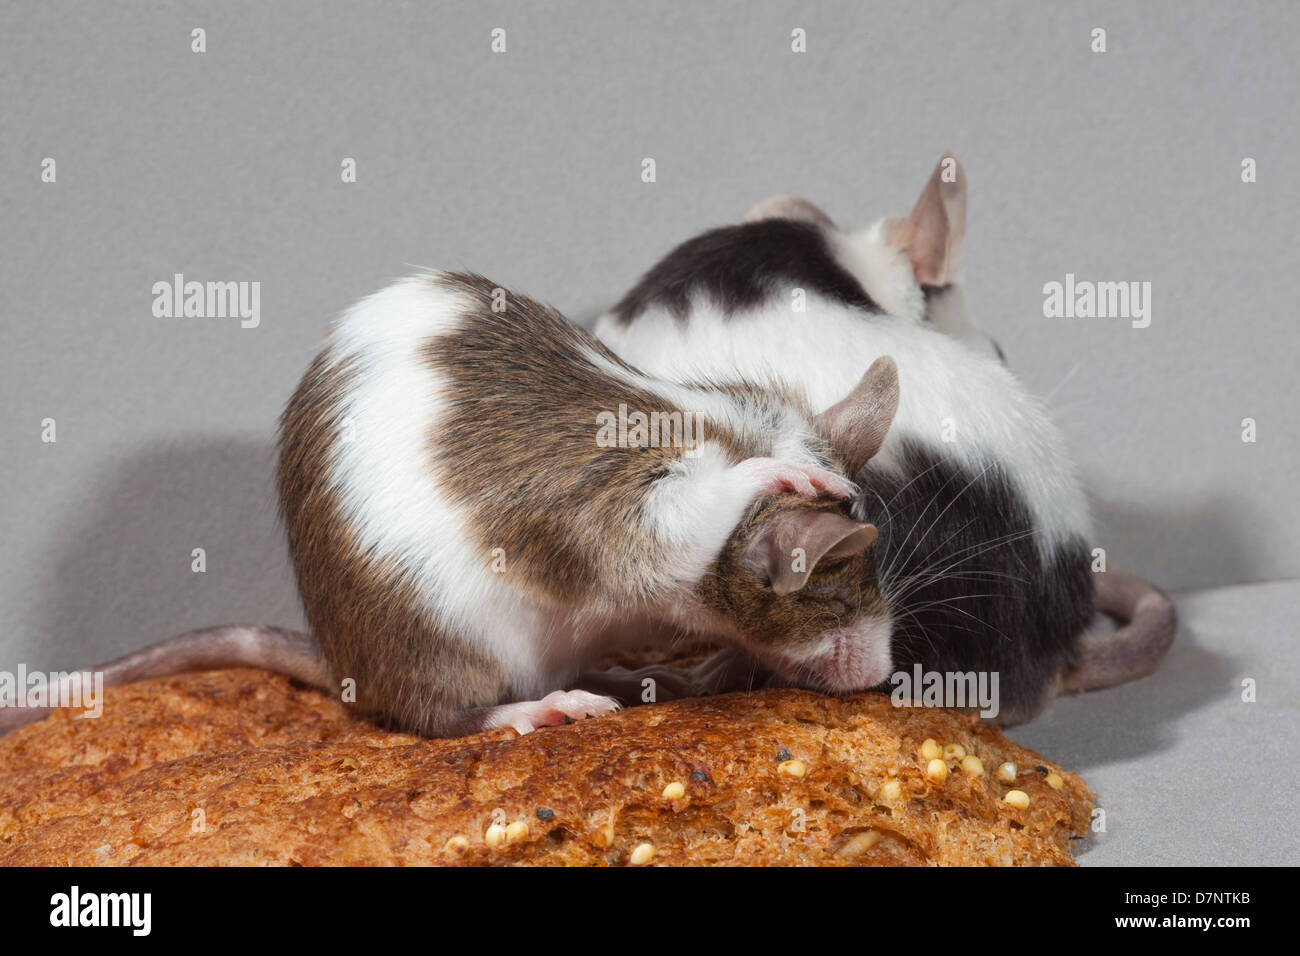 Pet Fancy Mice (Mus musculus). Skewbald, brown and white, Piebald, black and white, self grooming. Sitting on a bread crust. Stock Photo